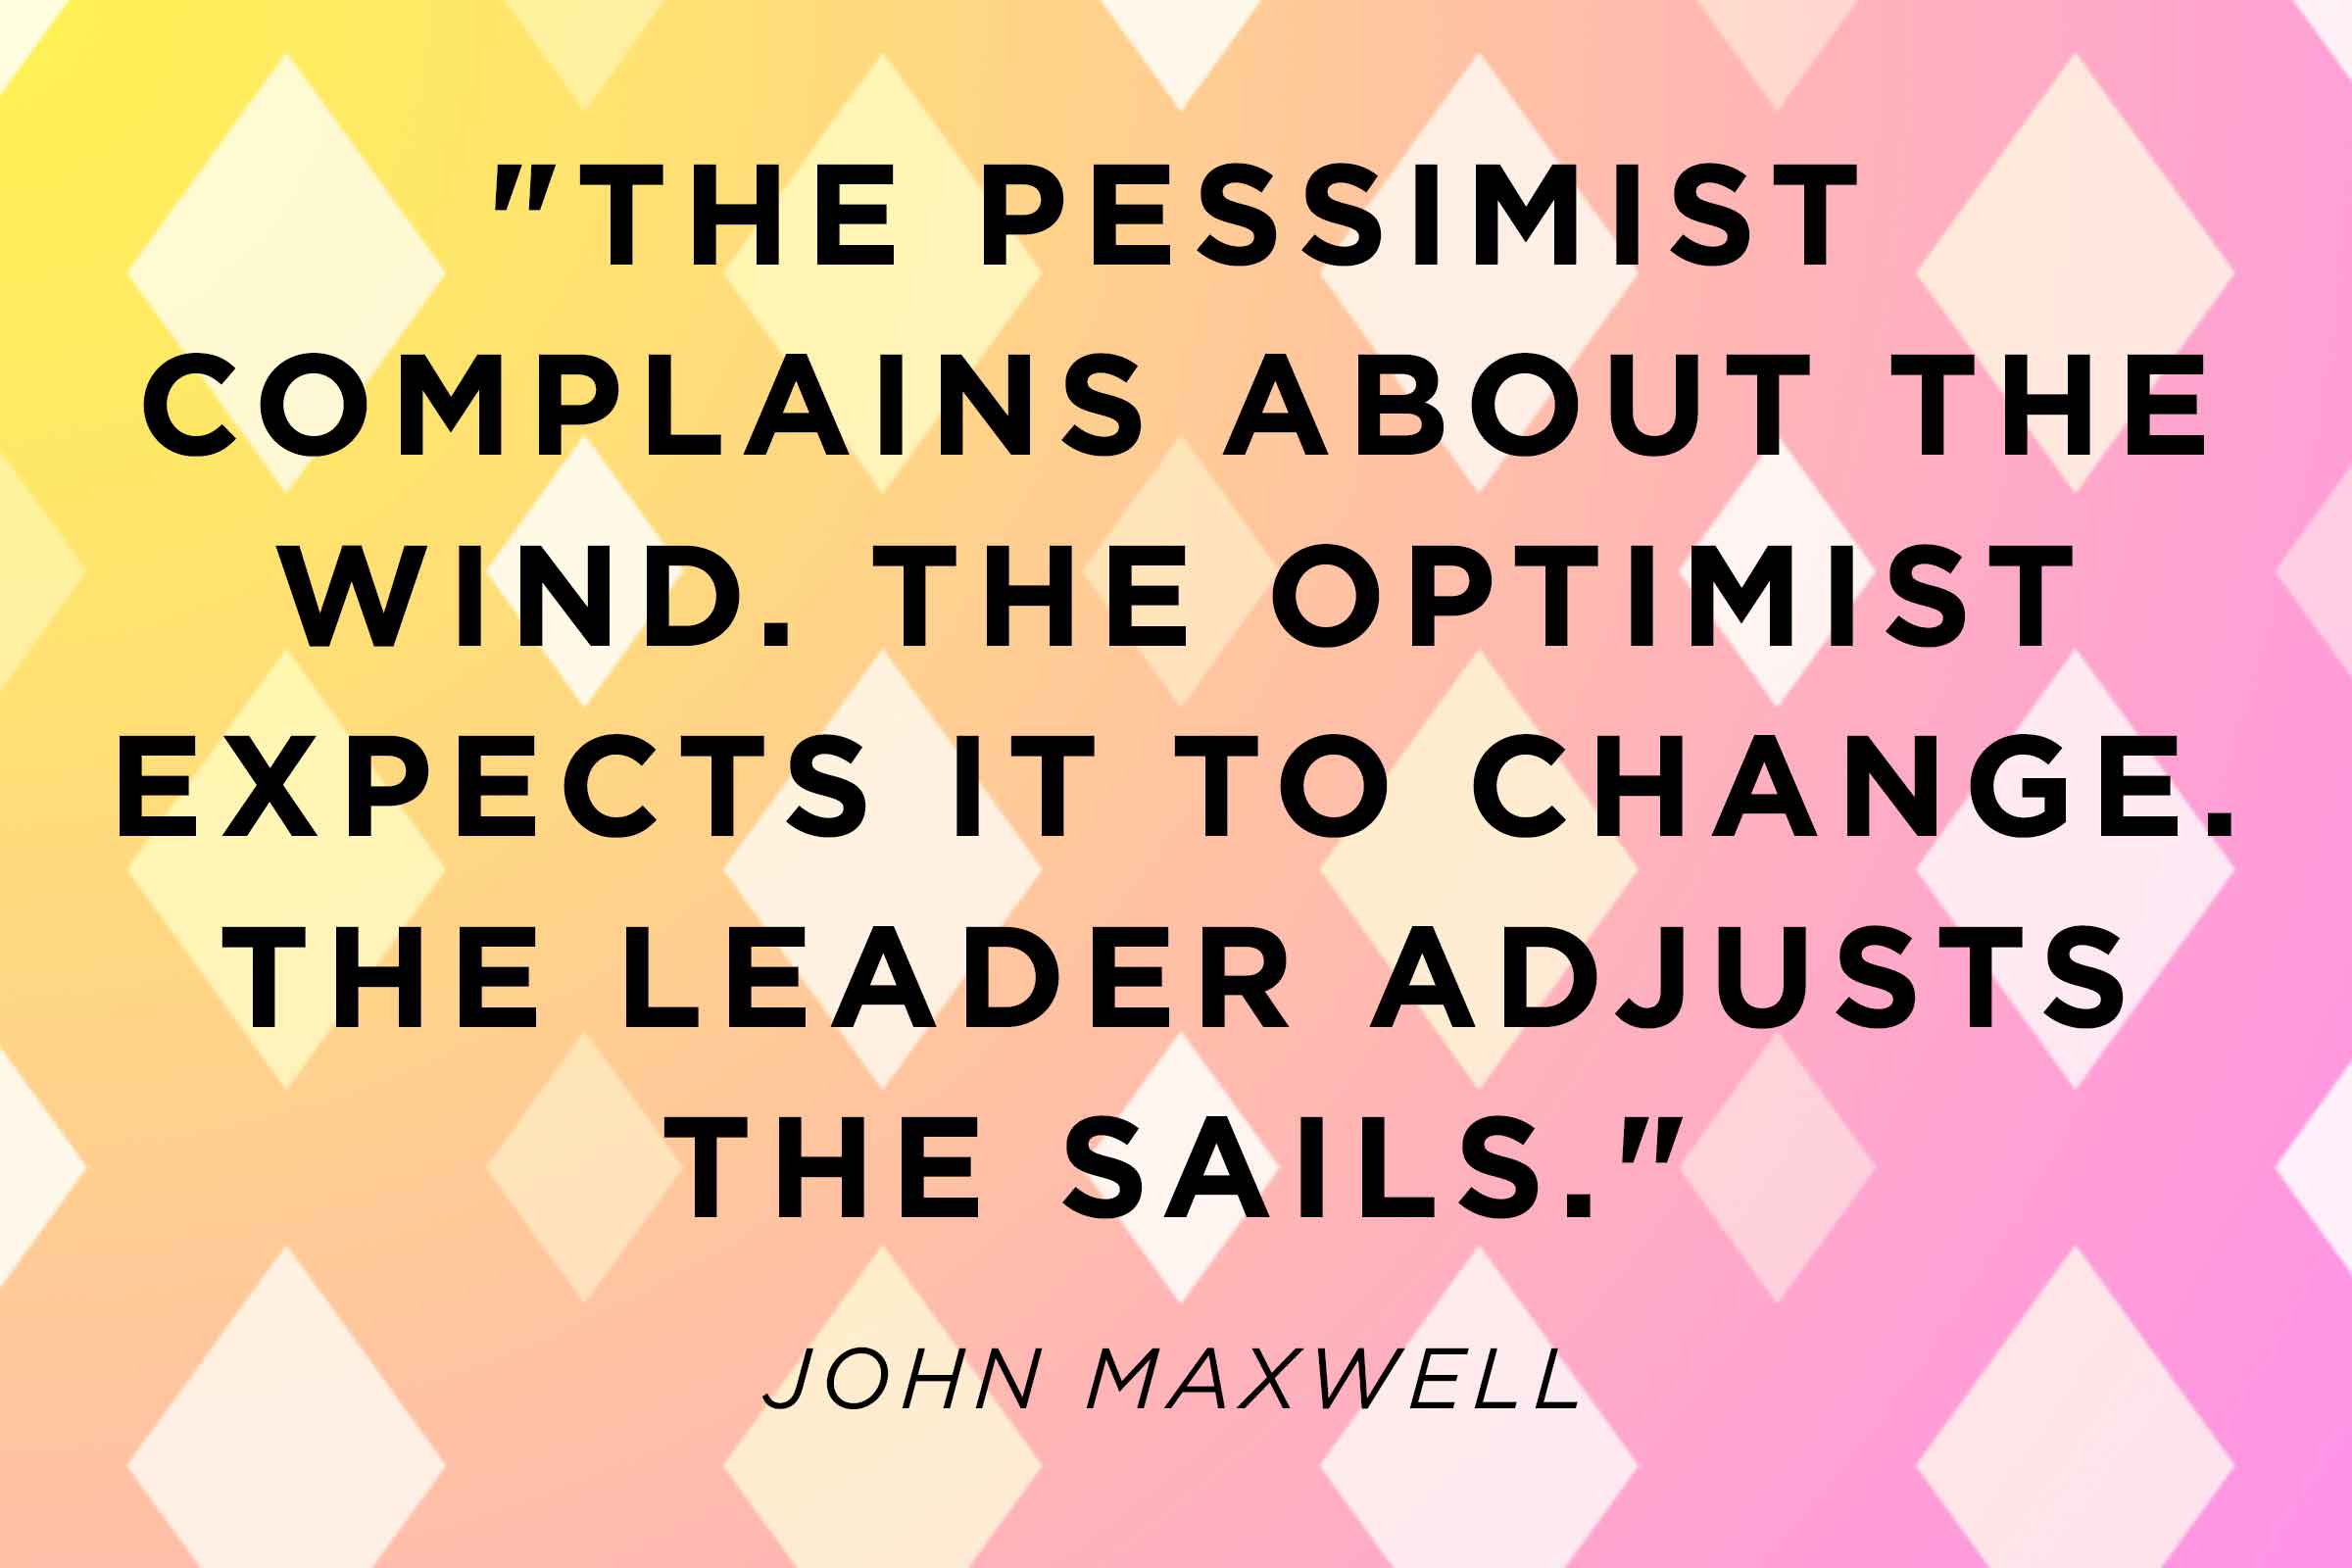 Always complaining. "The Pessimist complains about the Wind. The Optimist expects it to change. The leader adjusts the Sails.” -John Maxwell.